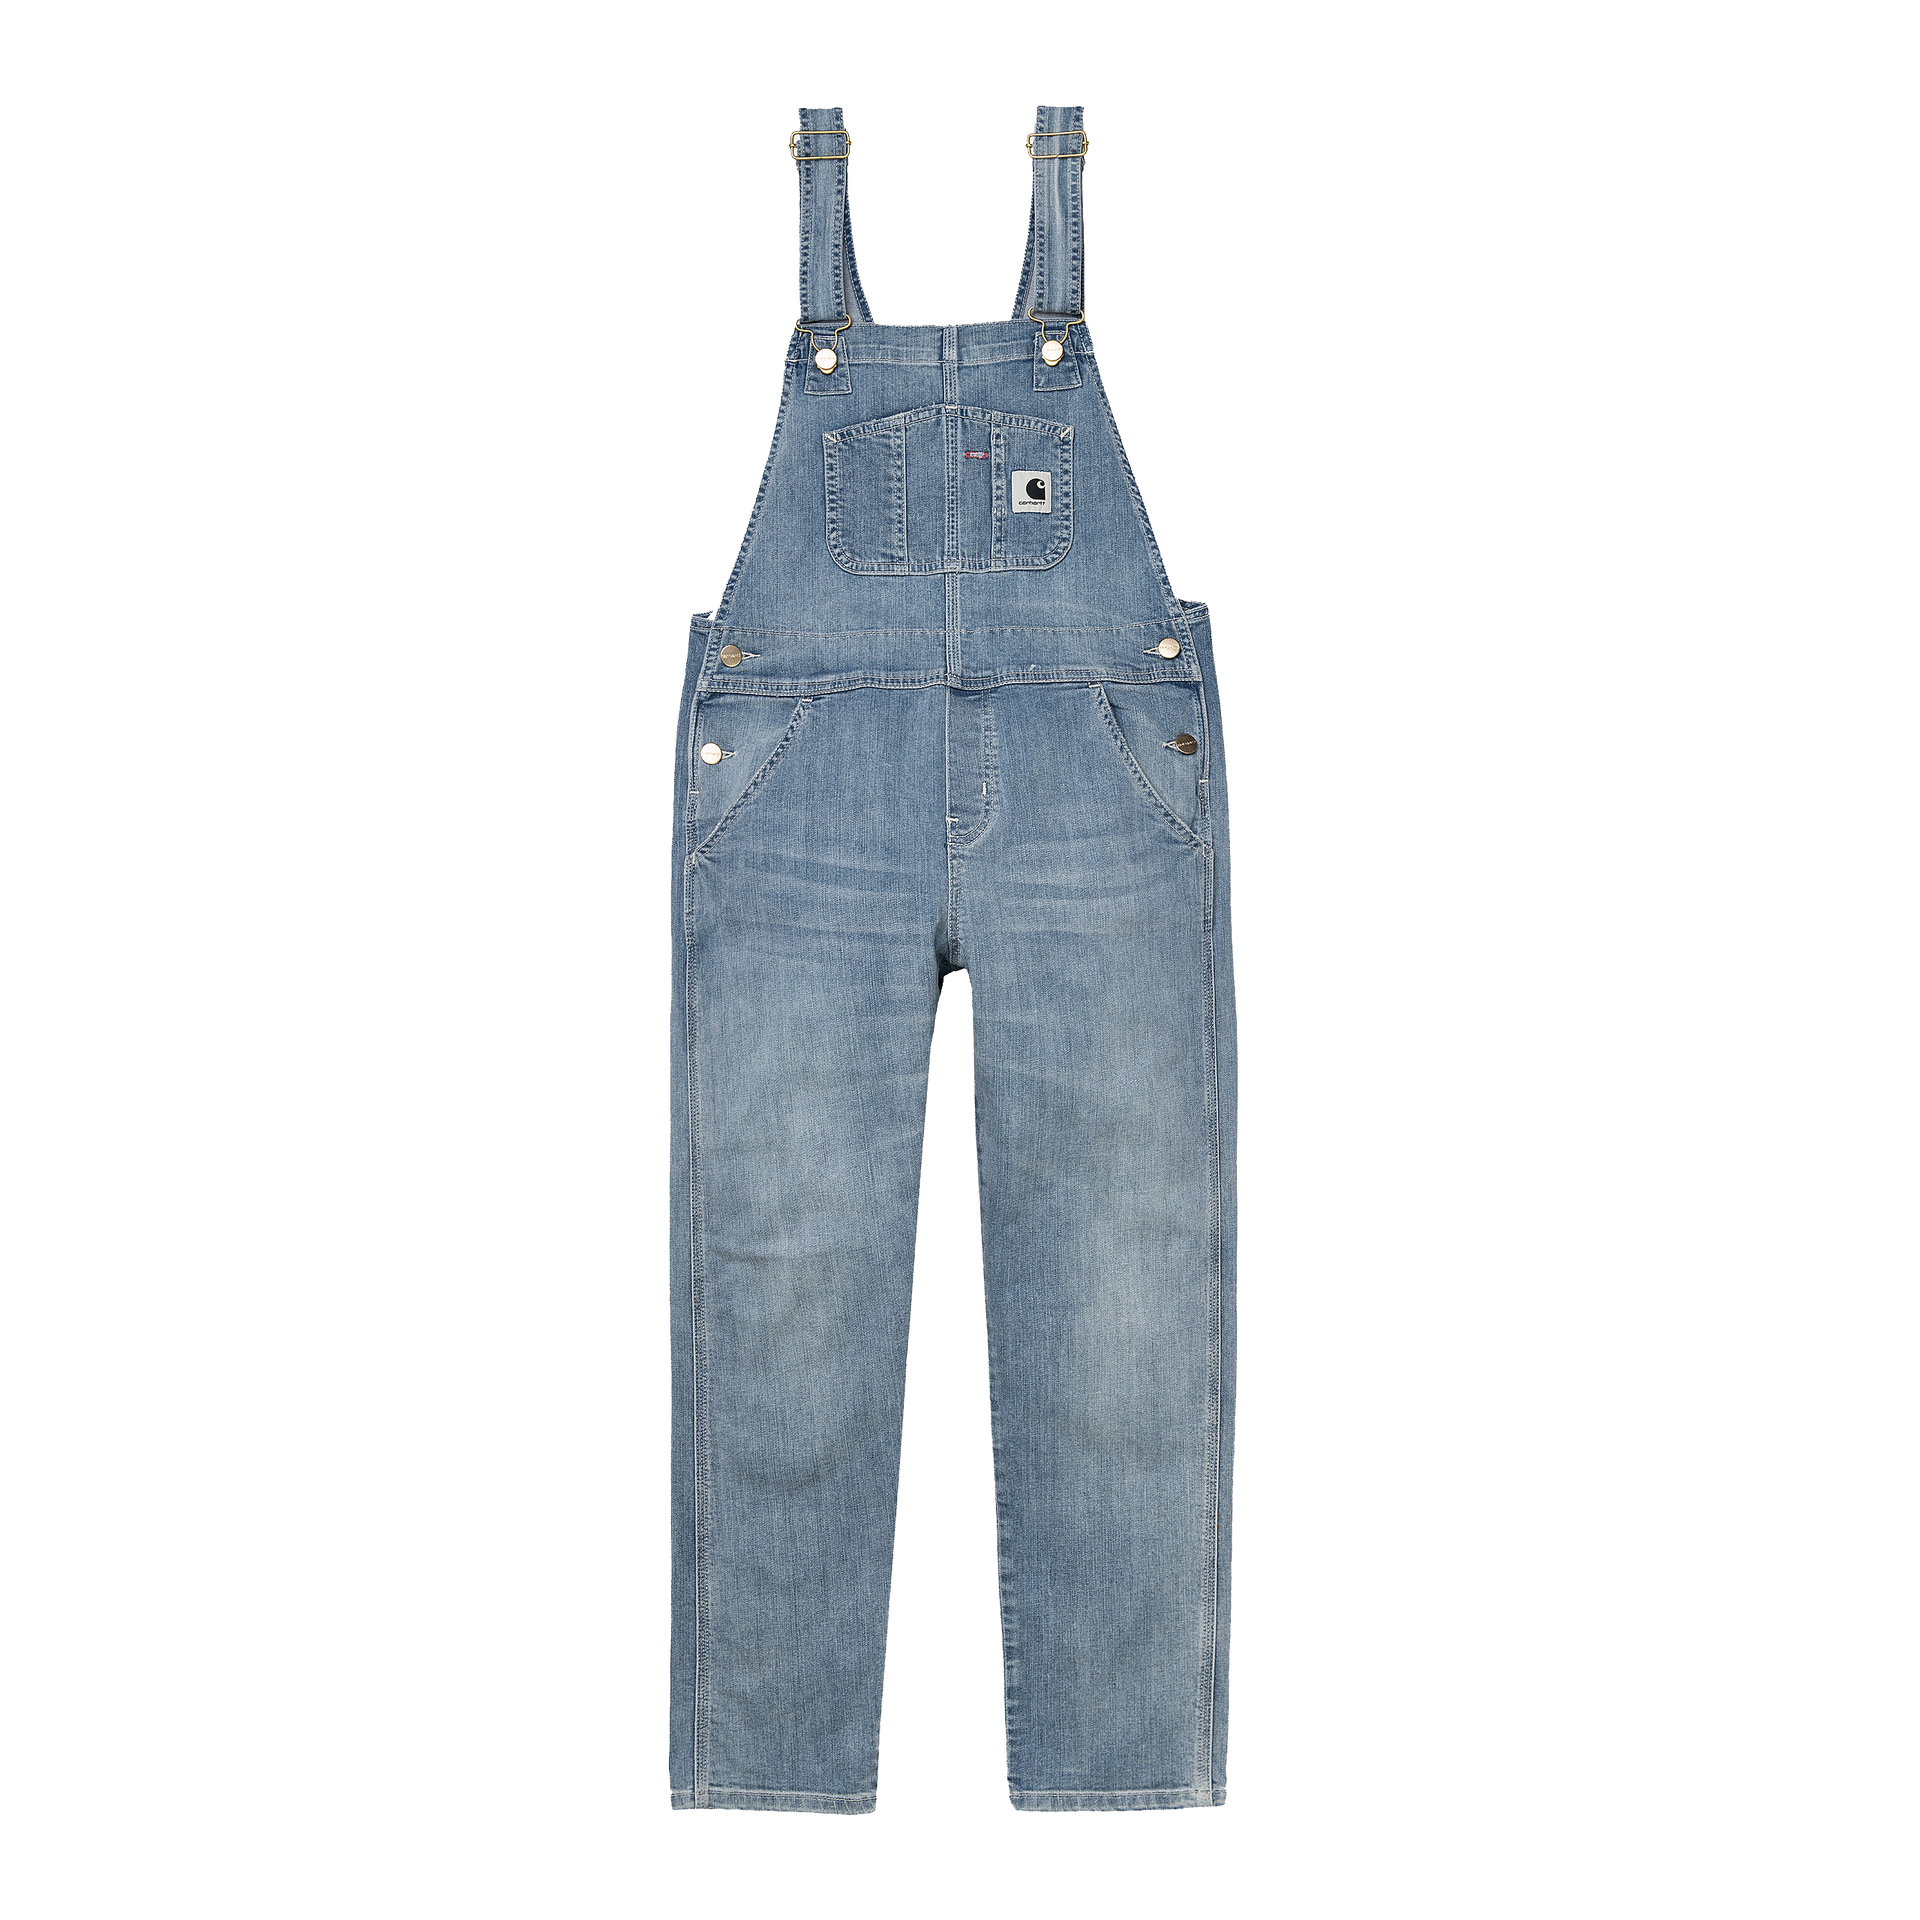 W' Bib Overall Blue Light Stoned Washed